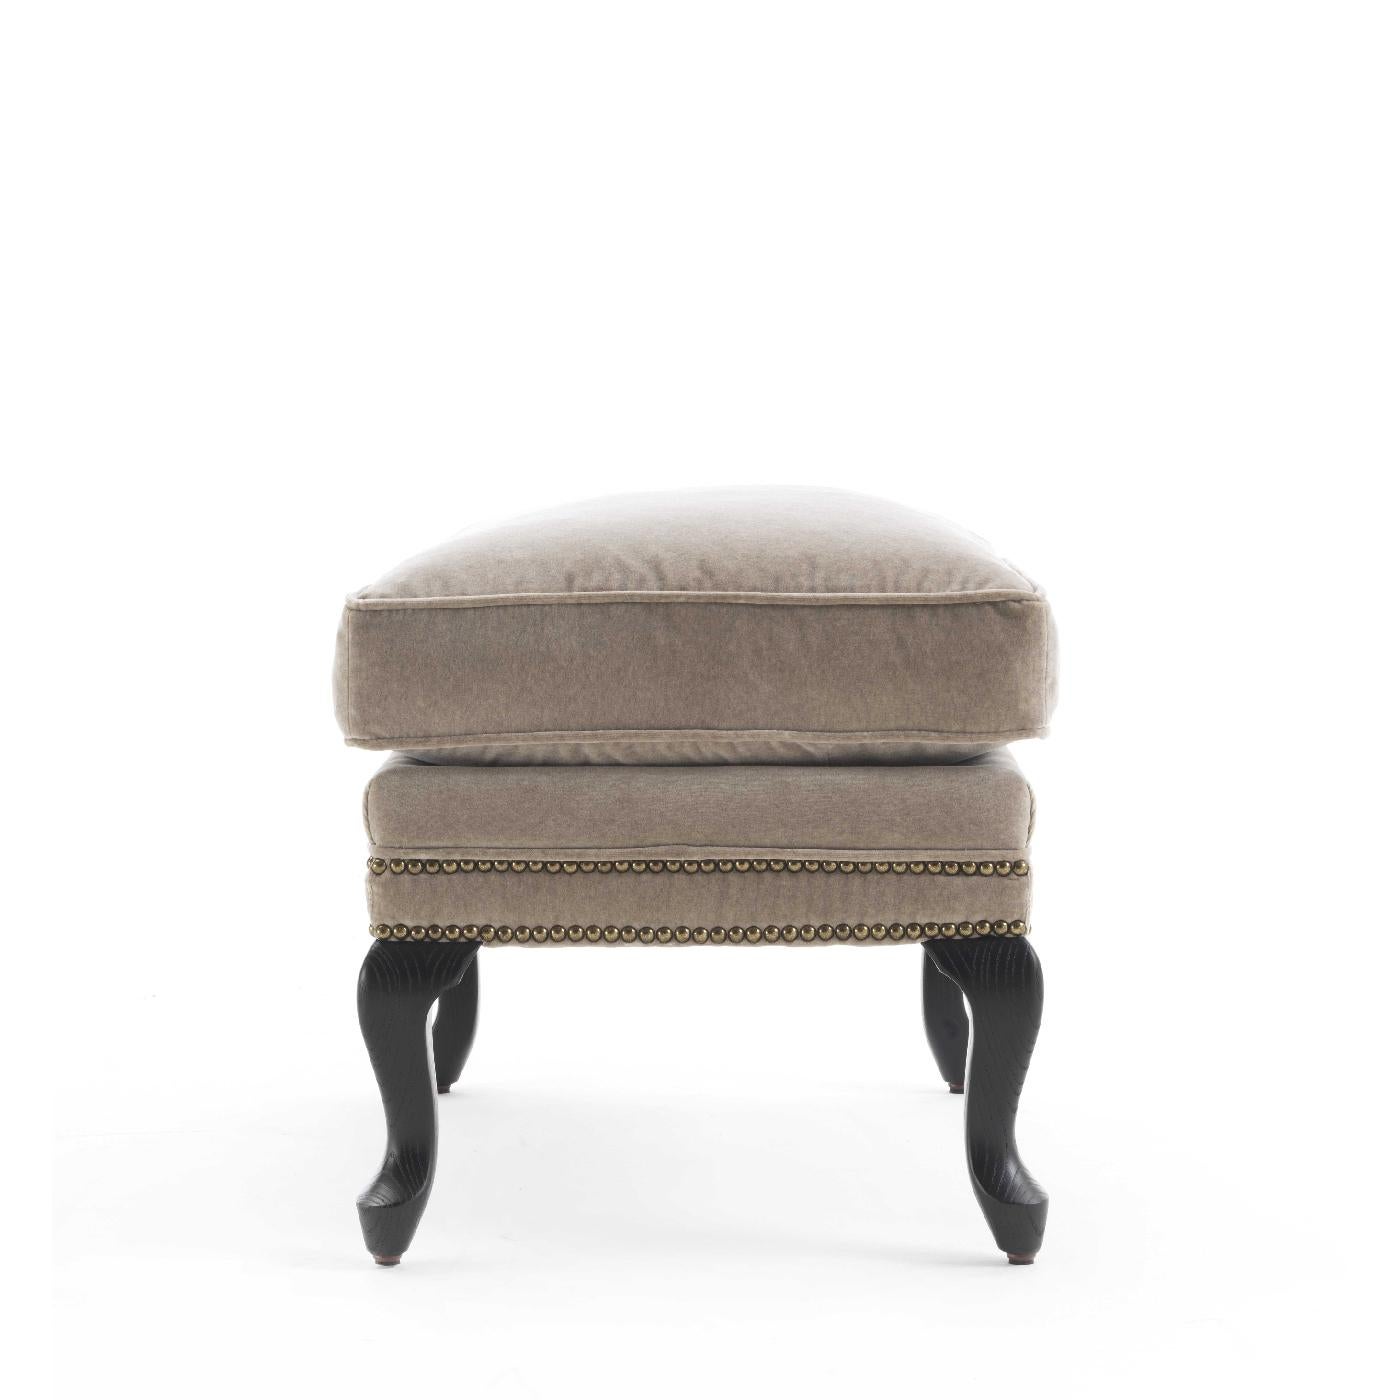 Part of the Como collection, this midcentury-inspired ottoman is the perfect complement to the Sinatra armchair, a set that will enliven a living room or bedroom decor with timeless elegance. The wooden frame features ash cabriole legs with an